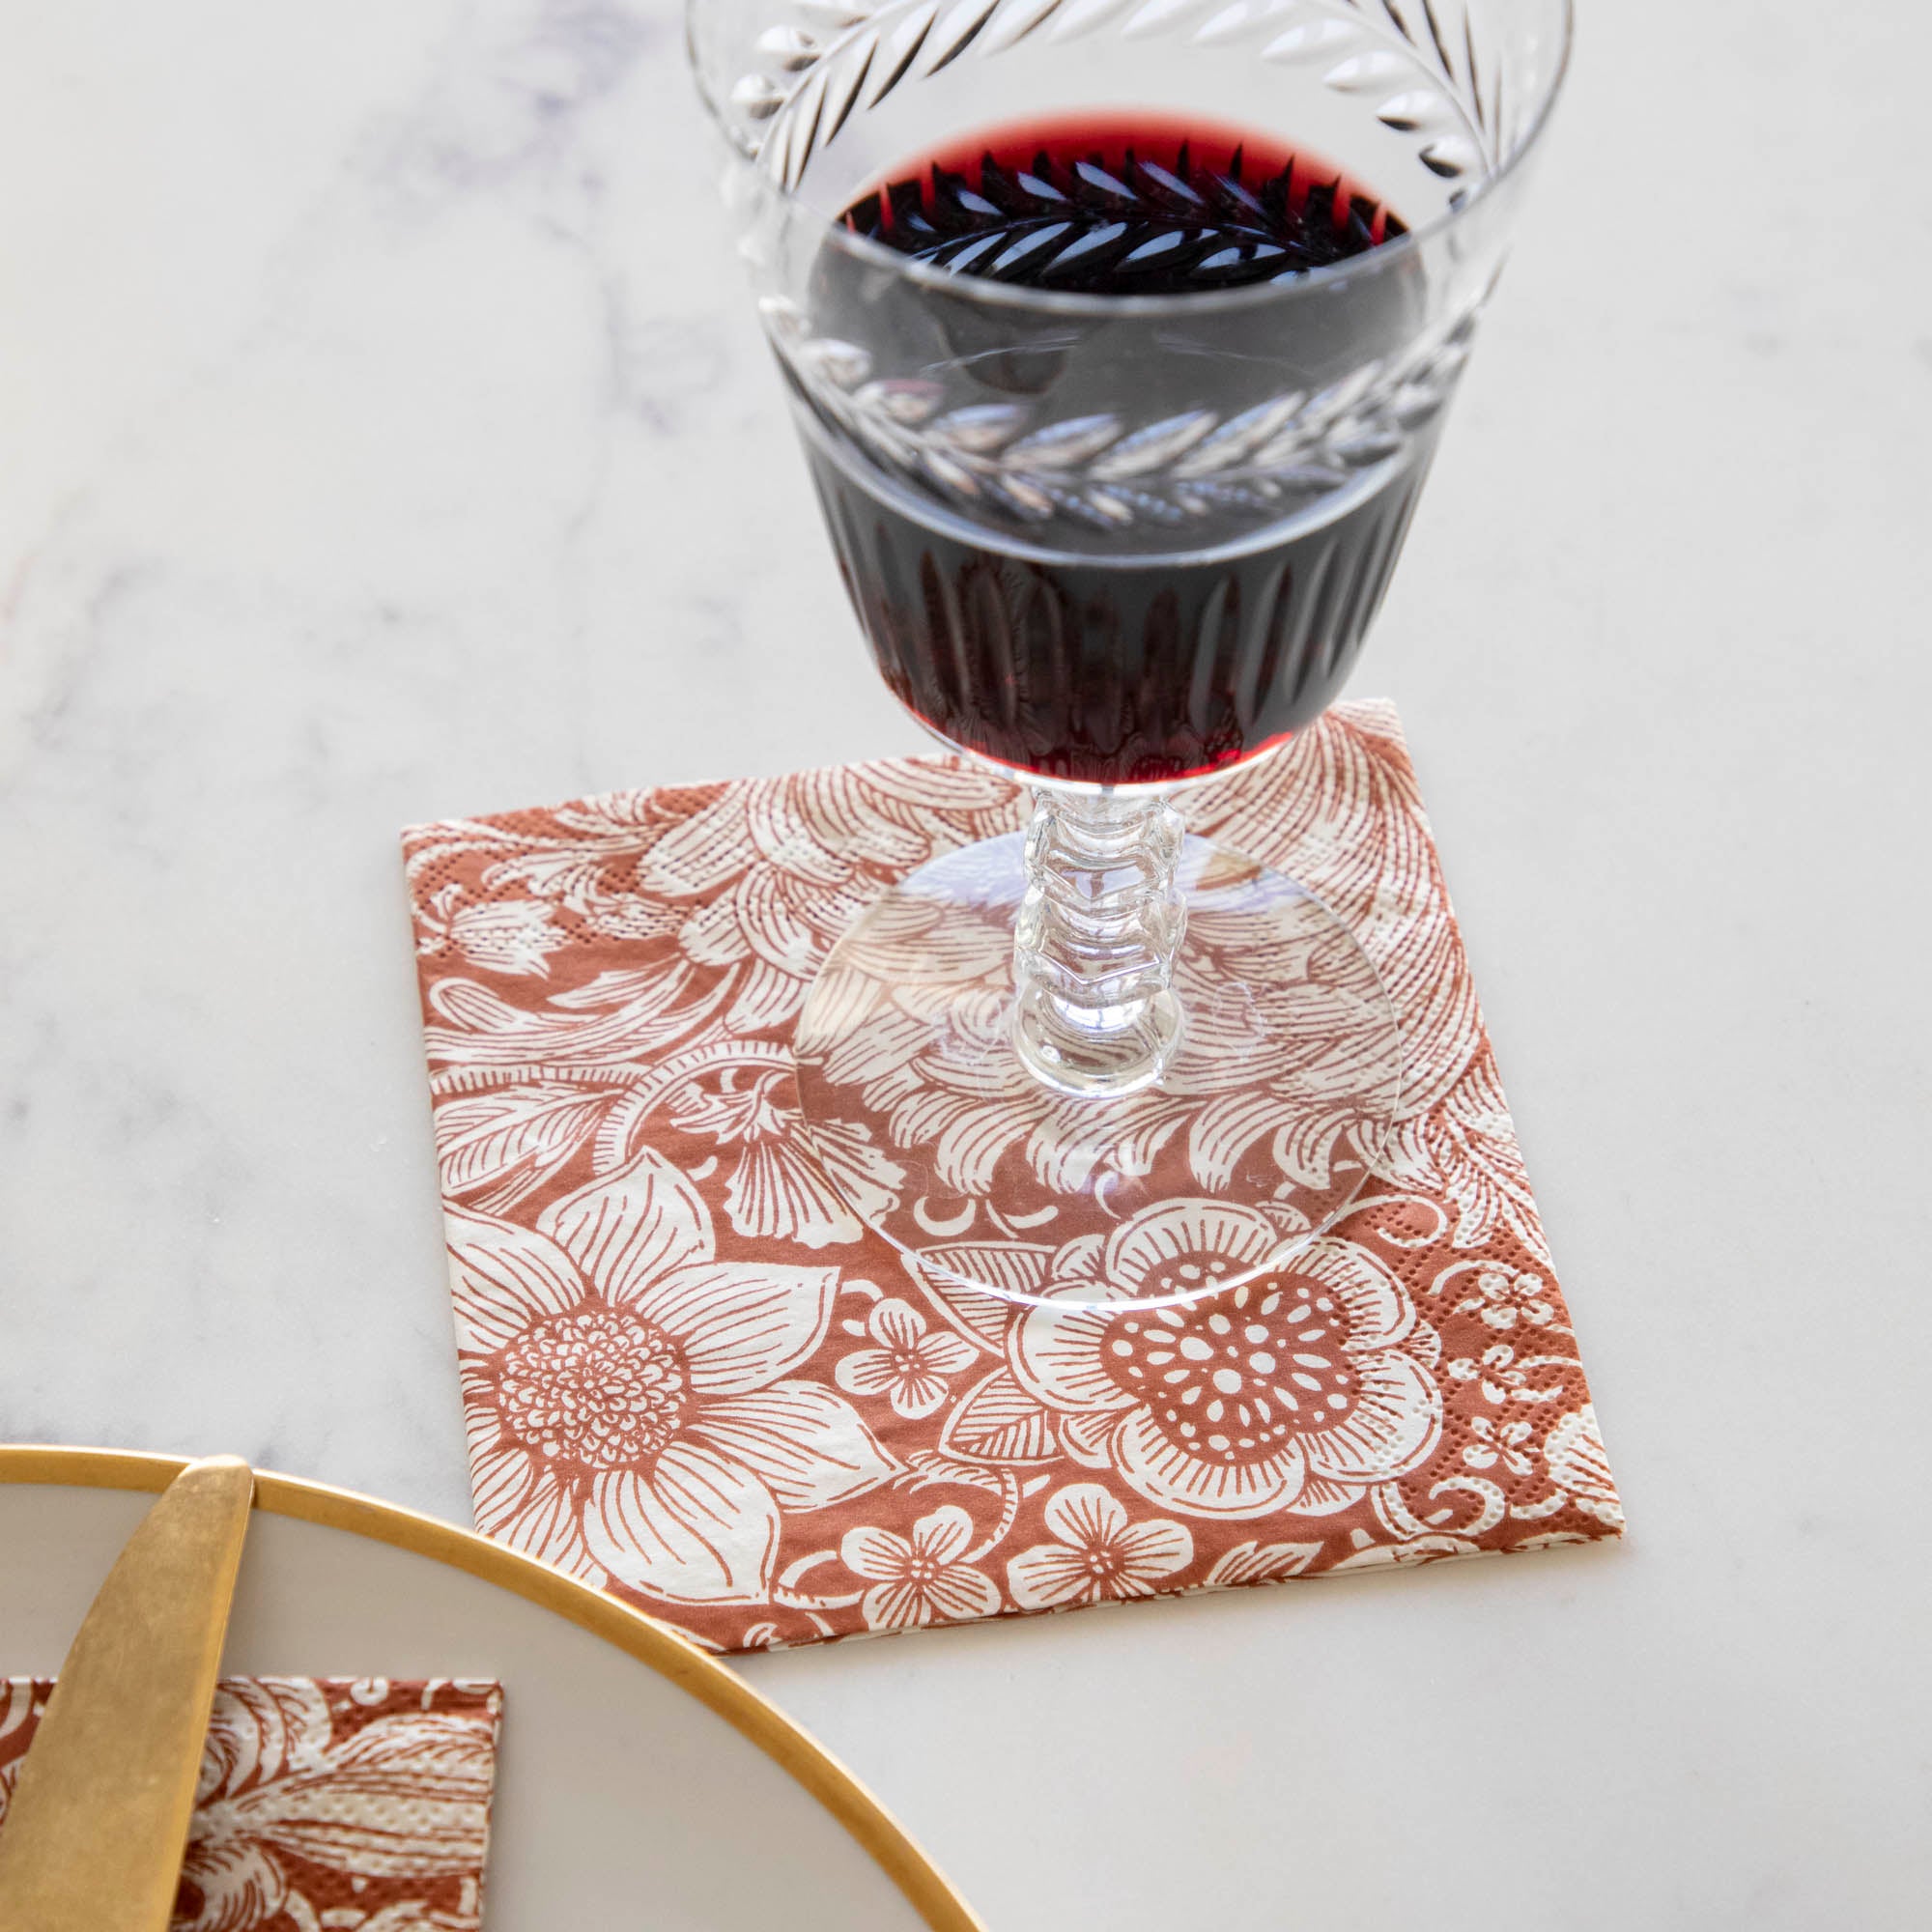 A Harvest Bouquet Cocktail Napkin under a glass of red wine with an elegant place setting.